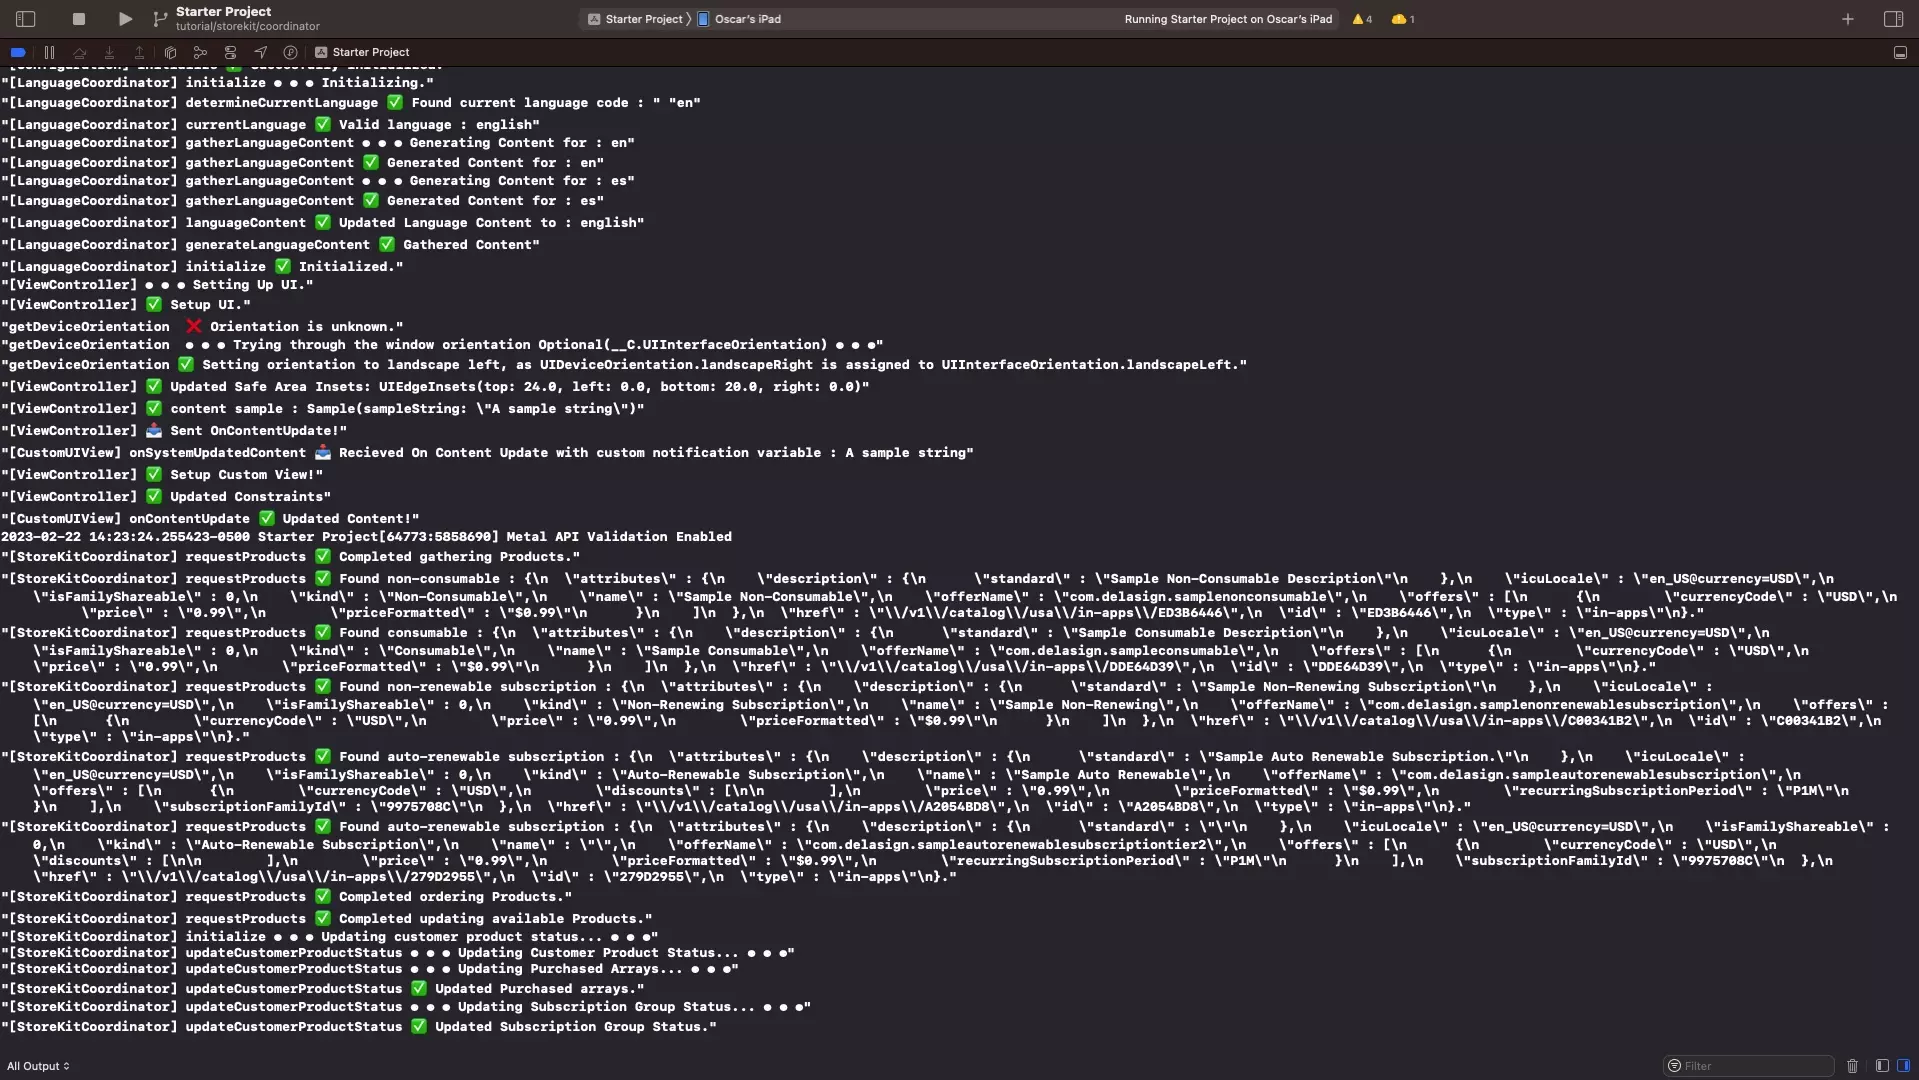 A screenshot of XCode showing the logs that describe that the StoreKitCoordinator was initialized successfully and that it gathered all the In-App Purchases and Subscriptions from the StoreKit Configuration File.